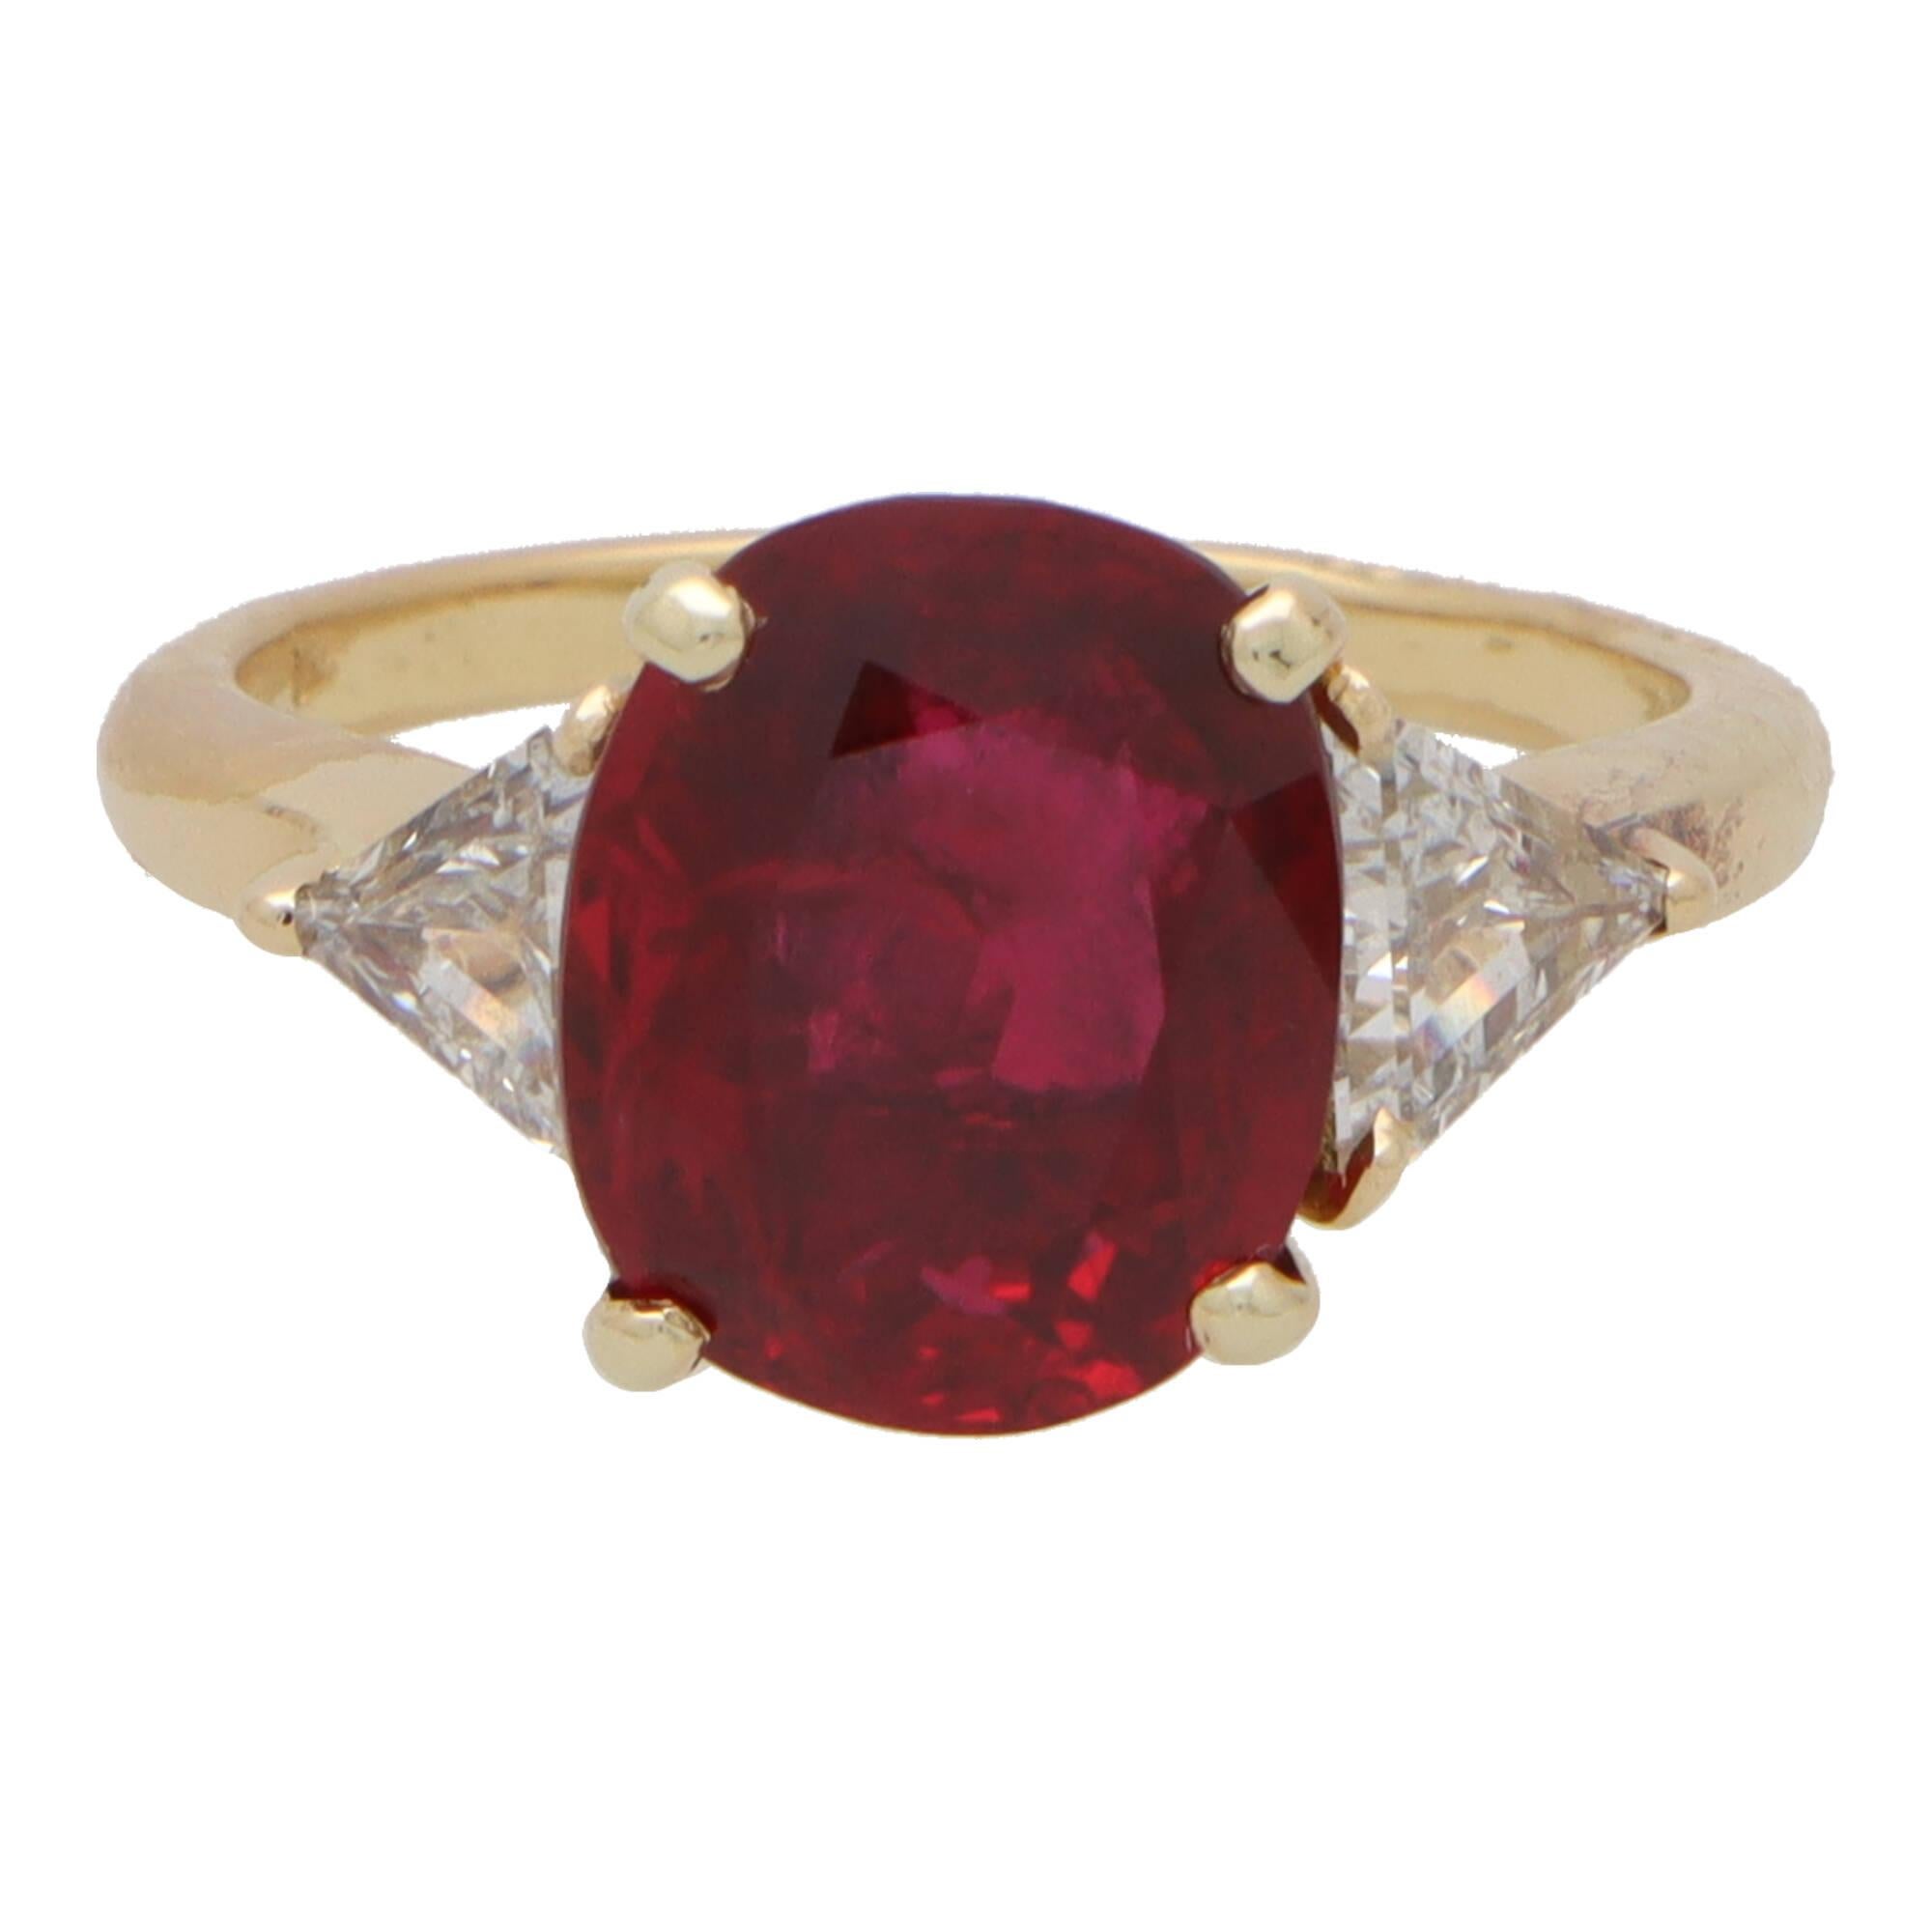  Vintage Boucheron Ruby and Diamond Ring Set in 18k Yellow Gold For Sale